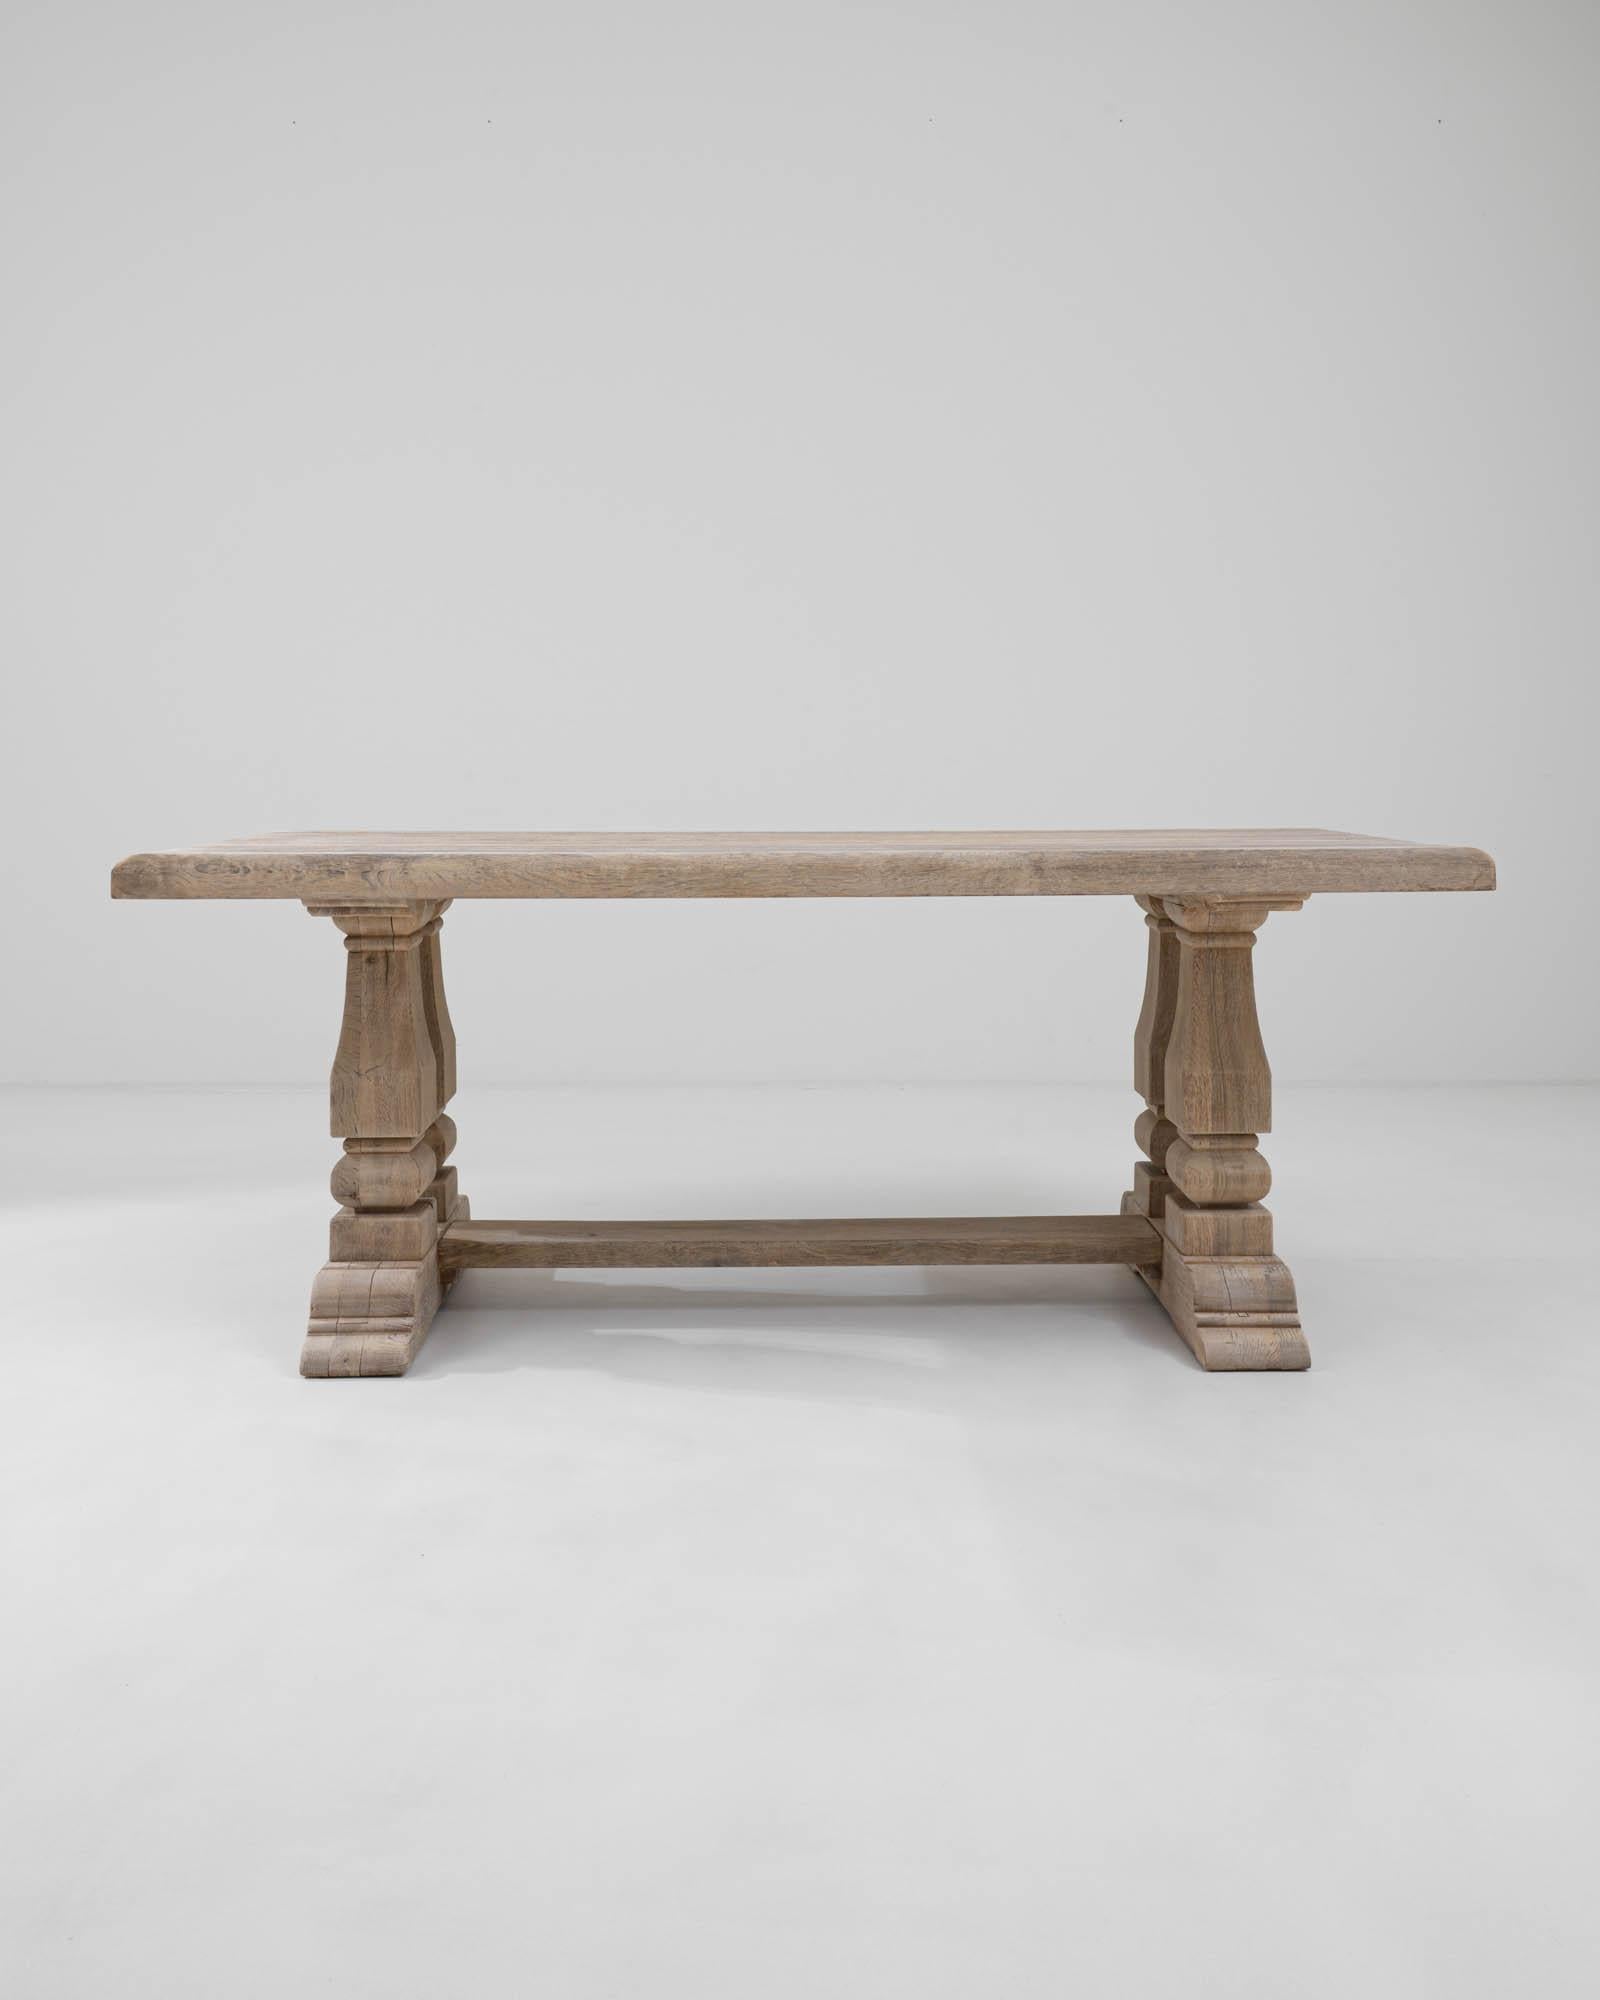 A wooden dining table created in 20th century Belgium. This massive dining table exudes both  confident and simultaneously precise and delicate aura. With sumptuously carved legs, carved into a form reminiscent of neo-gothic style, connected into a